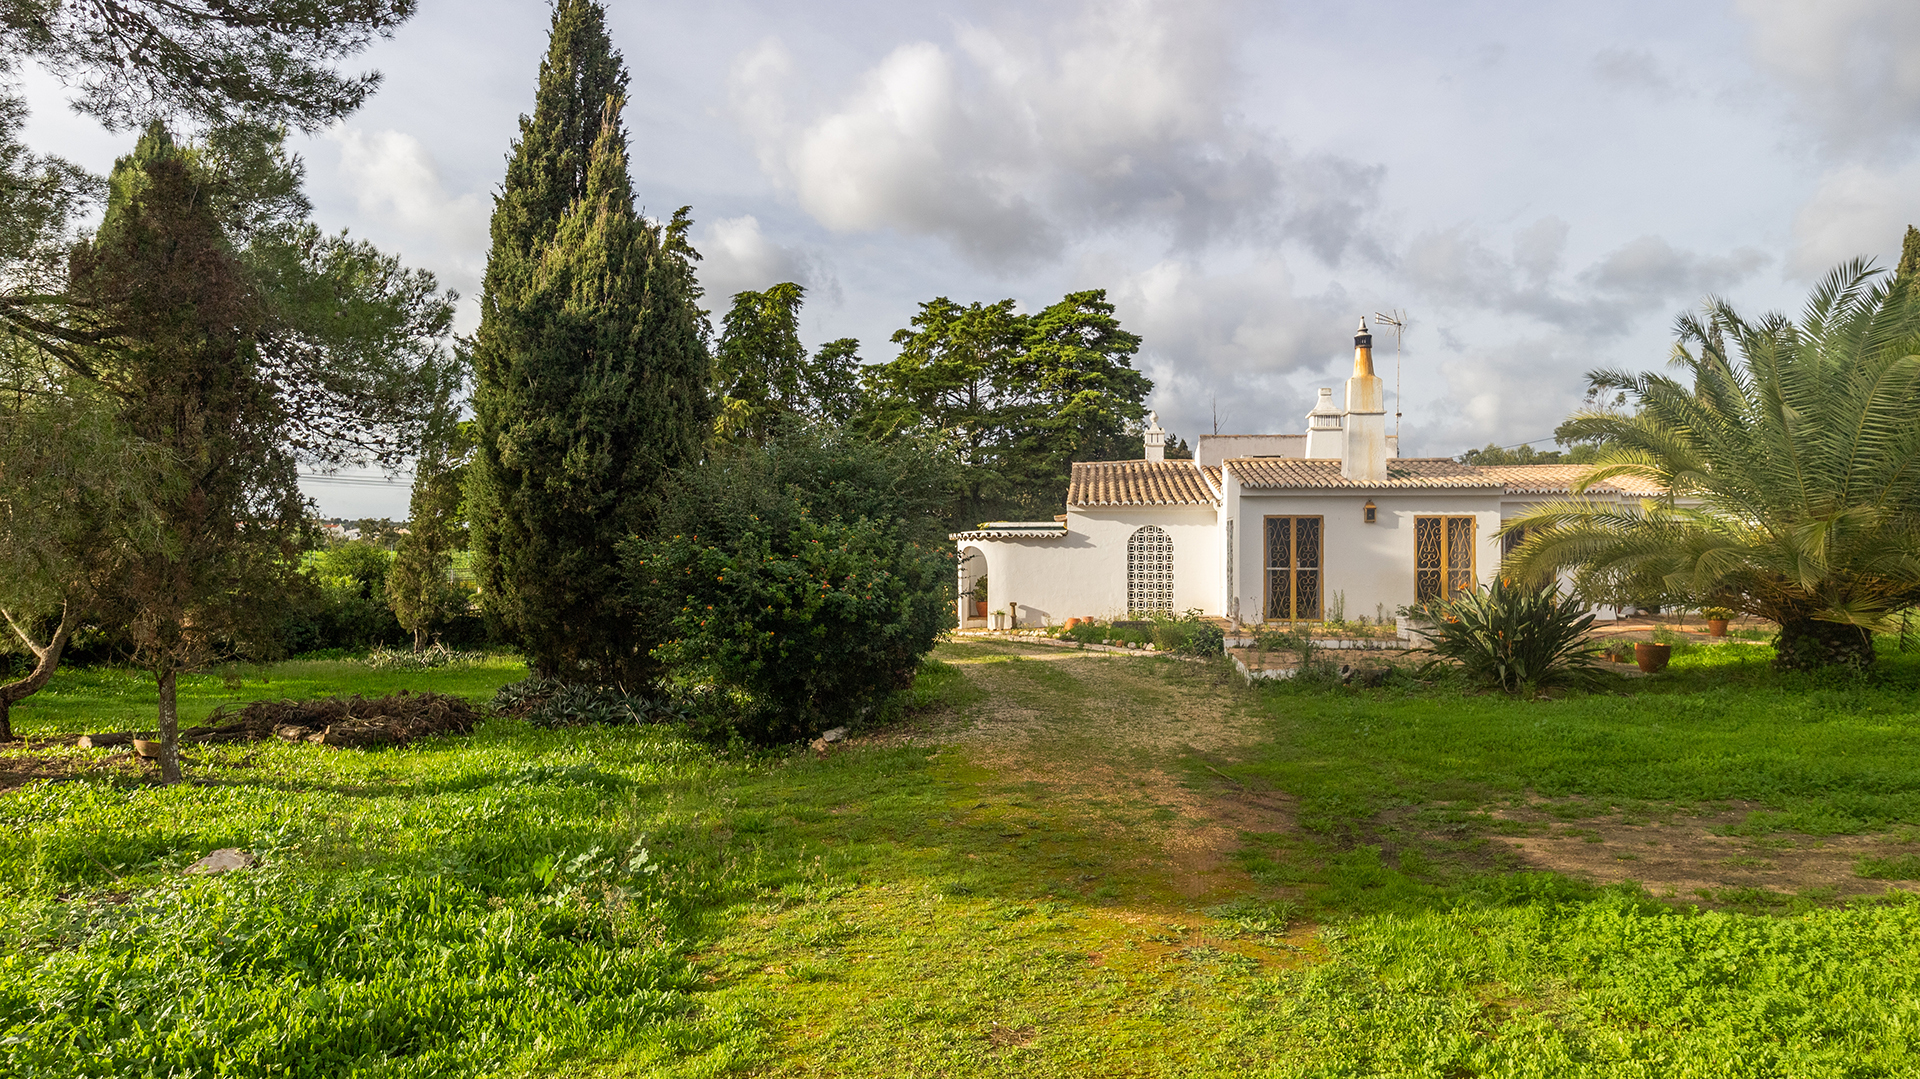 Opportunity - Charming 3 Bedroom Country Villa for Renovation on Large Plot, near Lagos | LG2028 Fantastic opportunity to buy a 3-bedroom country house on the outskirts of the village of Odiaxere and within a 5 minute drive of Meia Praia beach and the historic town of Lagos.